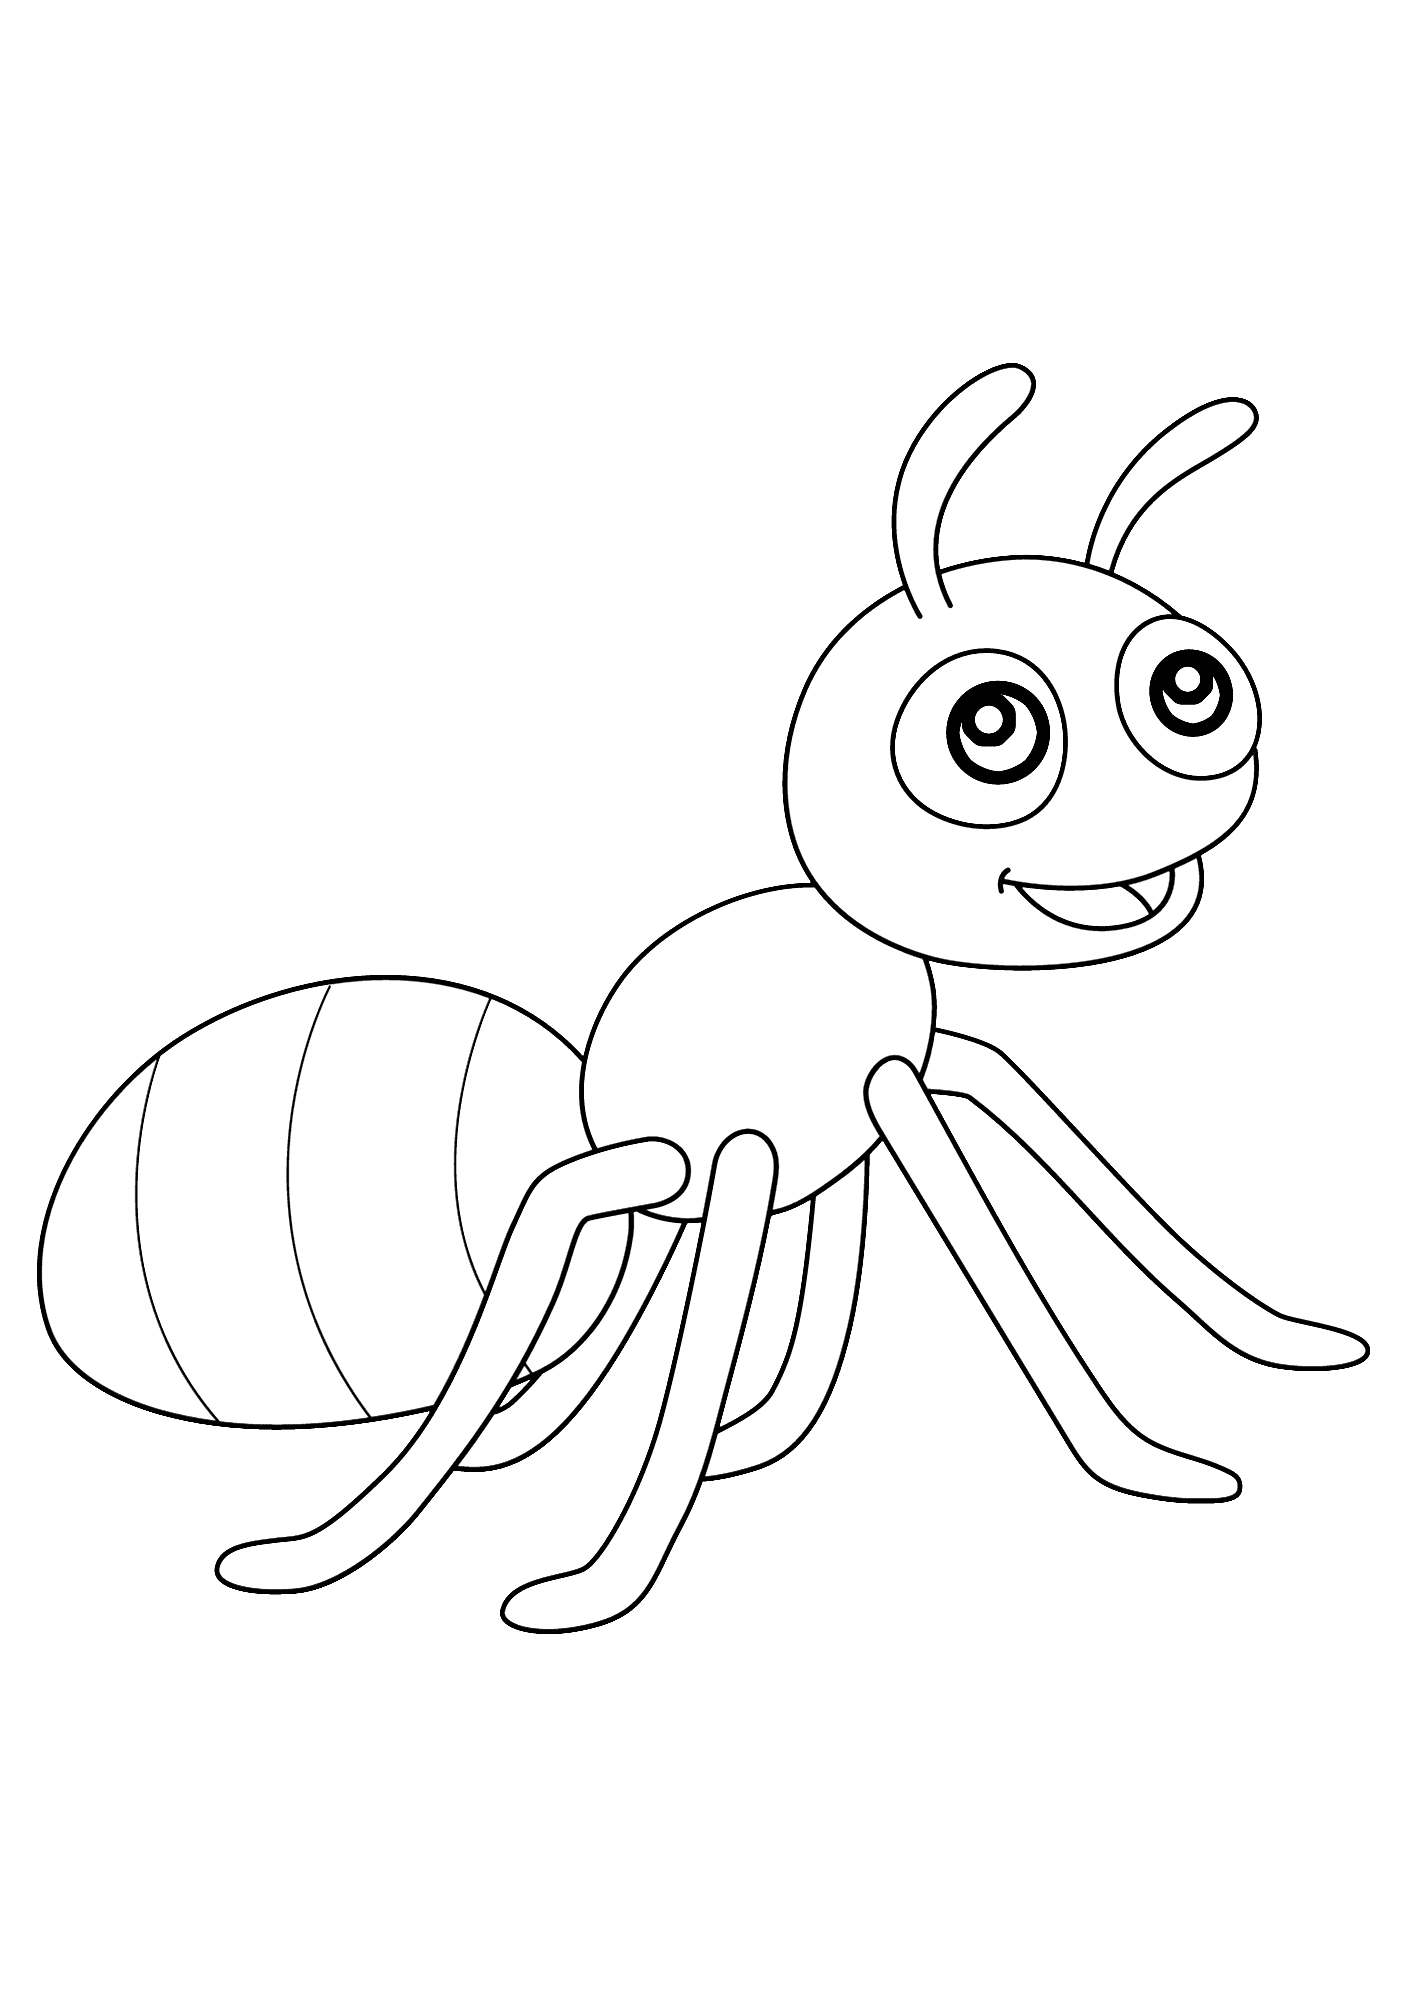 Ant Man Coloring Page